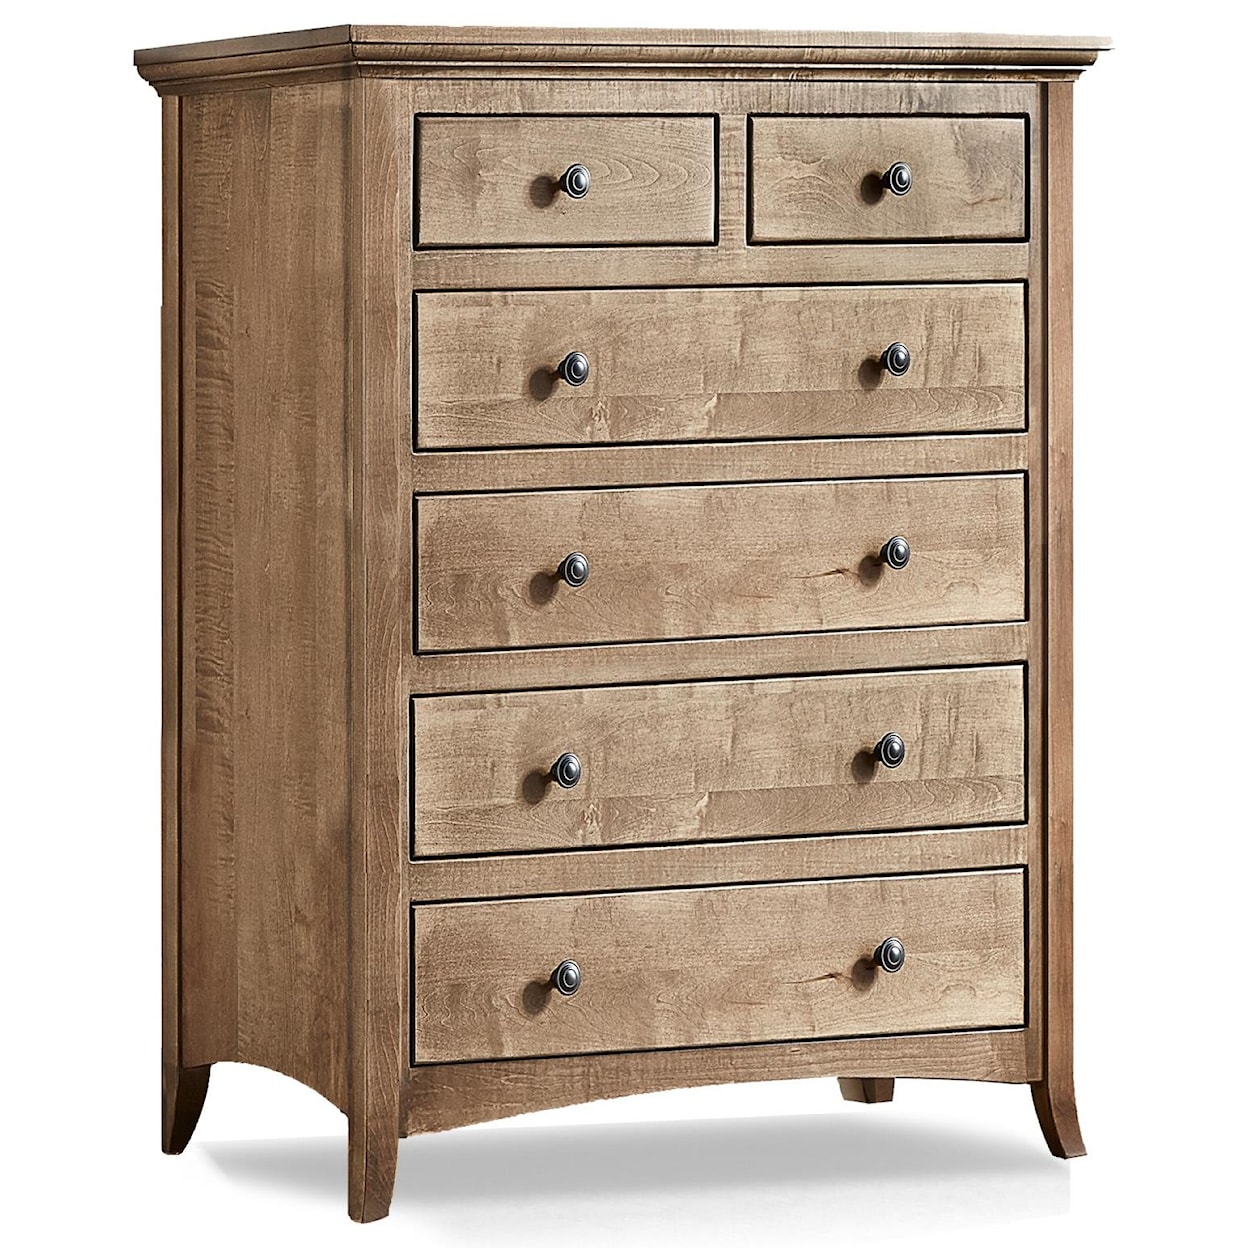 Archbold Furniture Provence Maple Collection 6-Drawer Chest